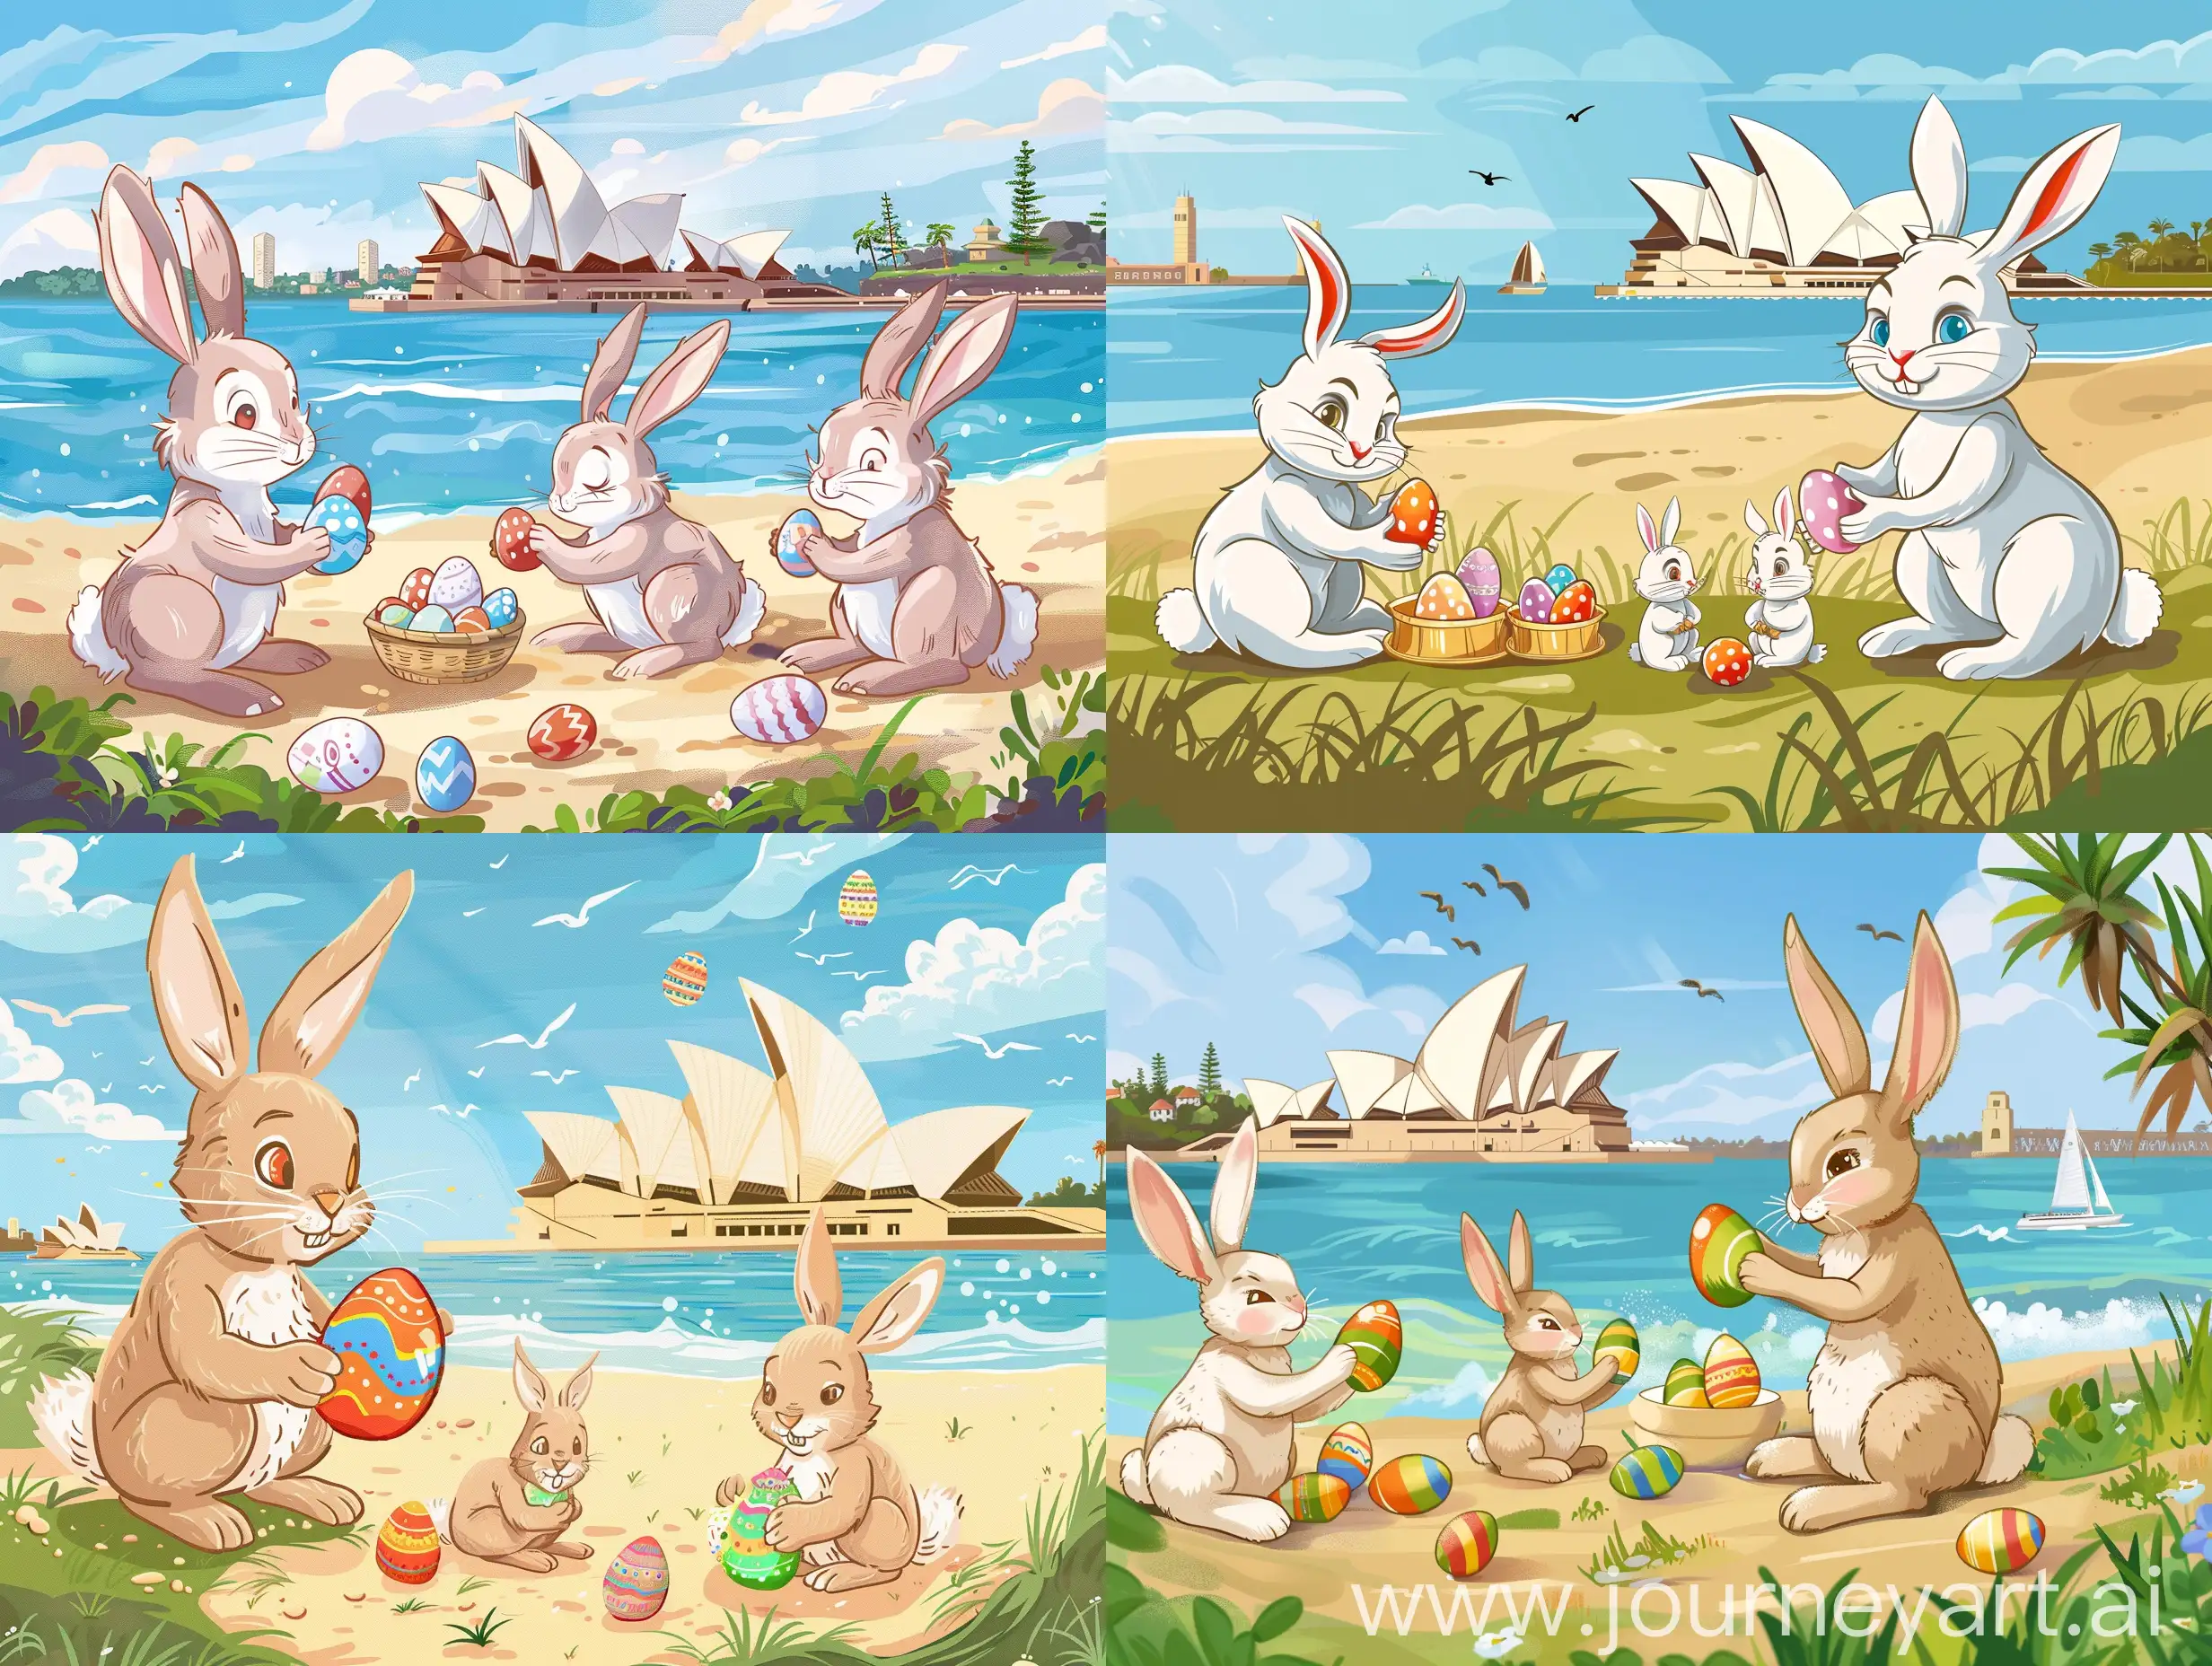 Cartoon-Easter-Bunny-Family-Preparing-Easter-Egg-Gifts-on-Beach-with-Sydney-Opera-House-Background